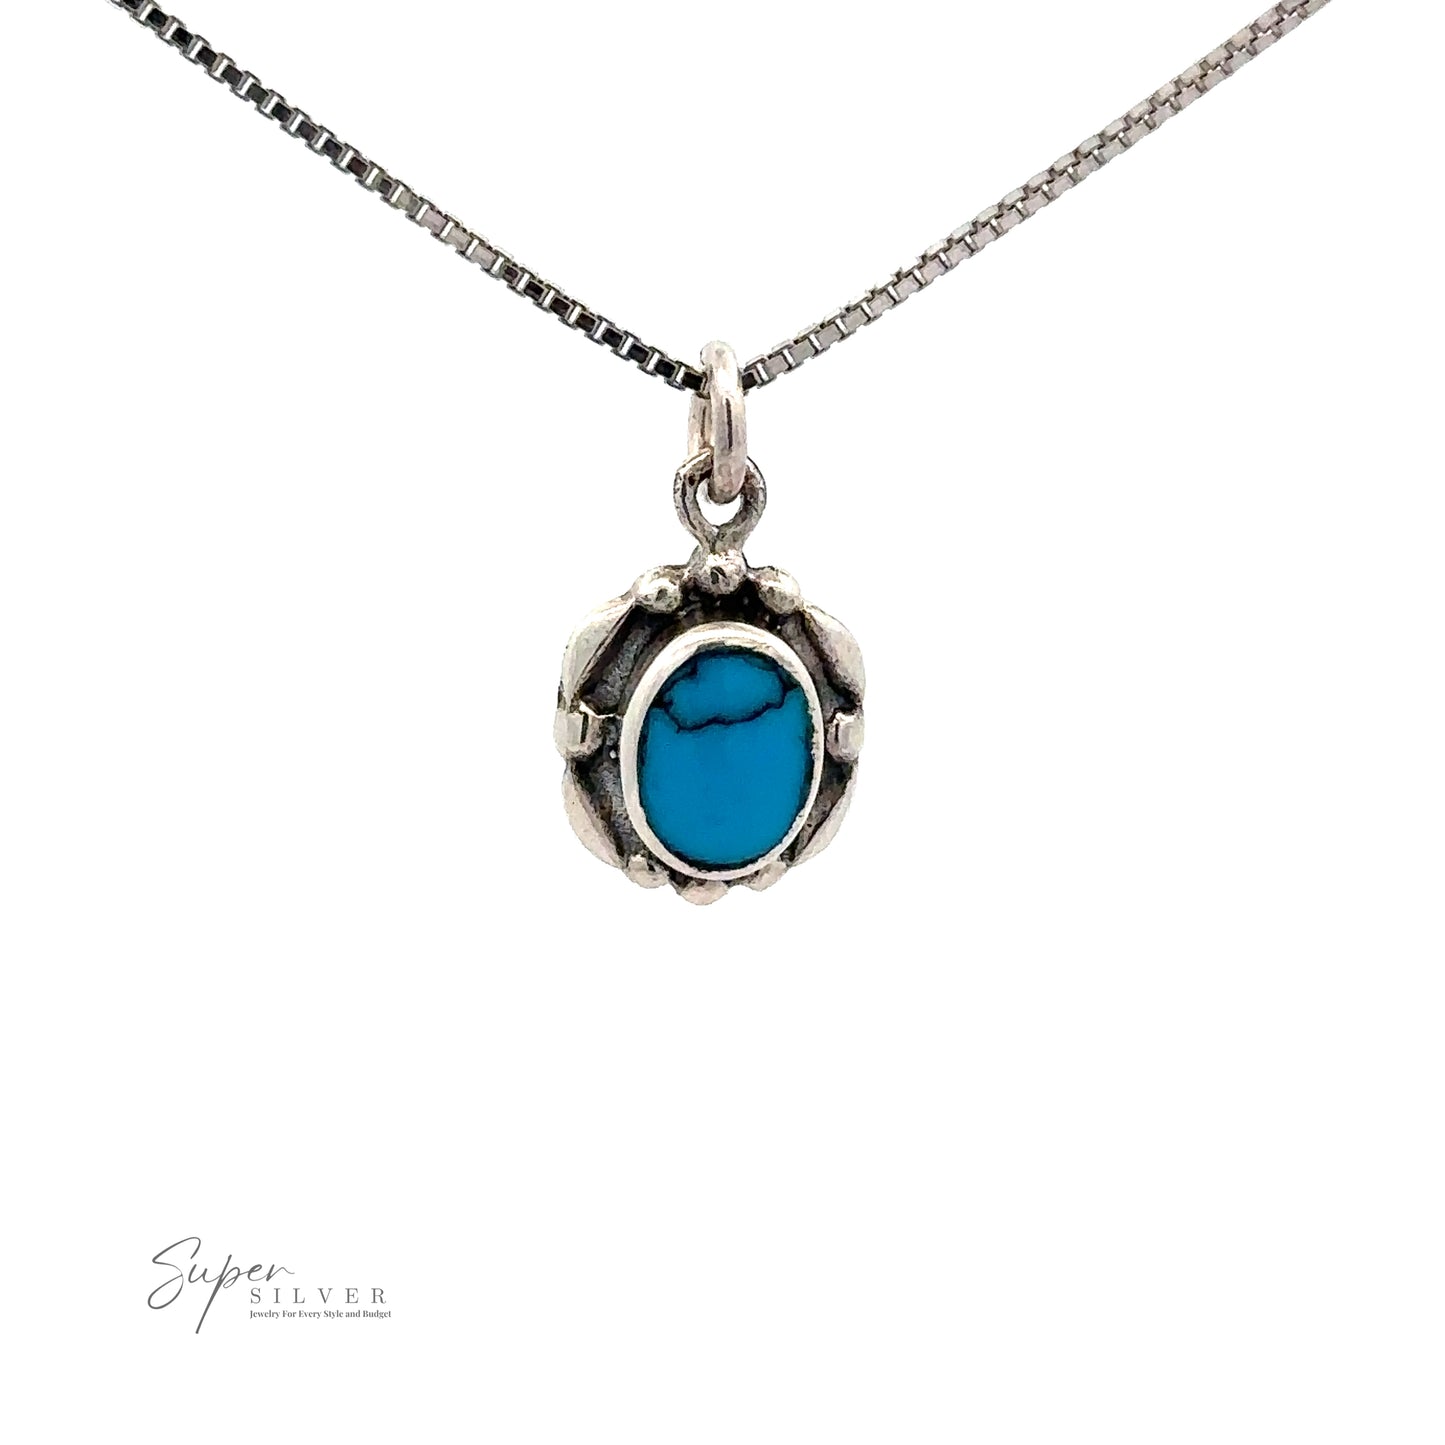 A Beautiful Oval Stone Pendant With Silver Border. The oval-shaped blue turquoise is set in an intricate silver frame, making this necklace a captivating addition to any jewelry collection.